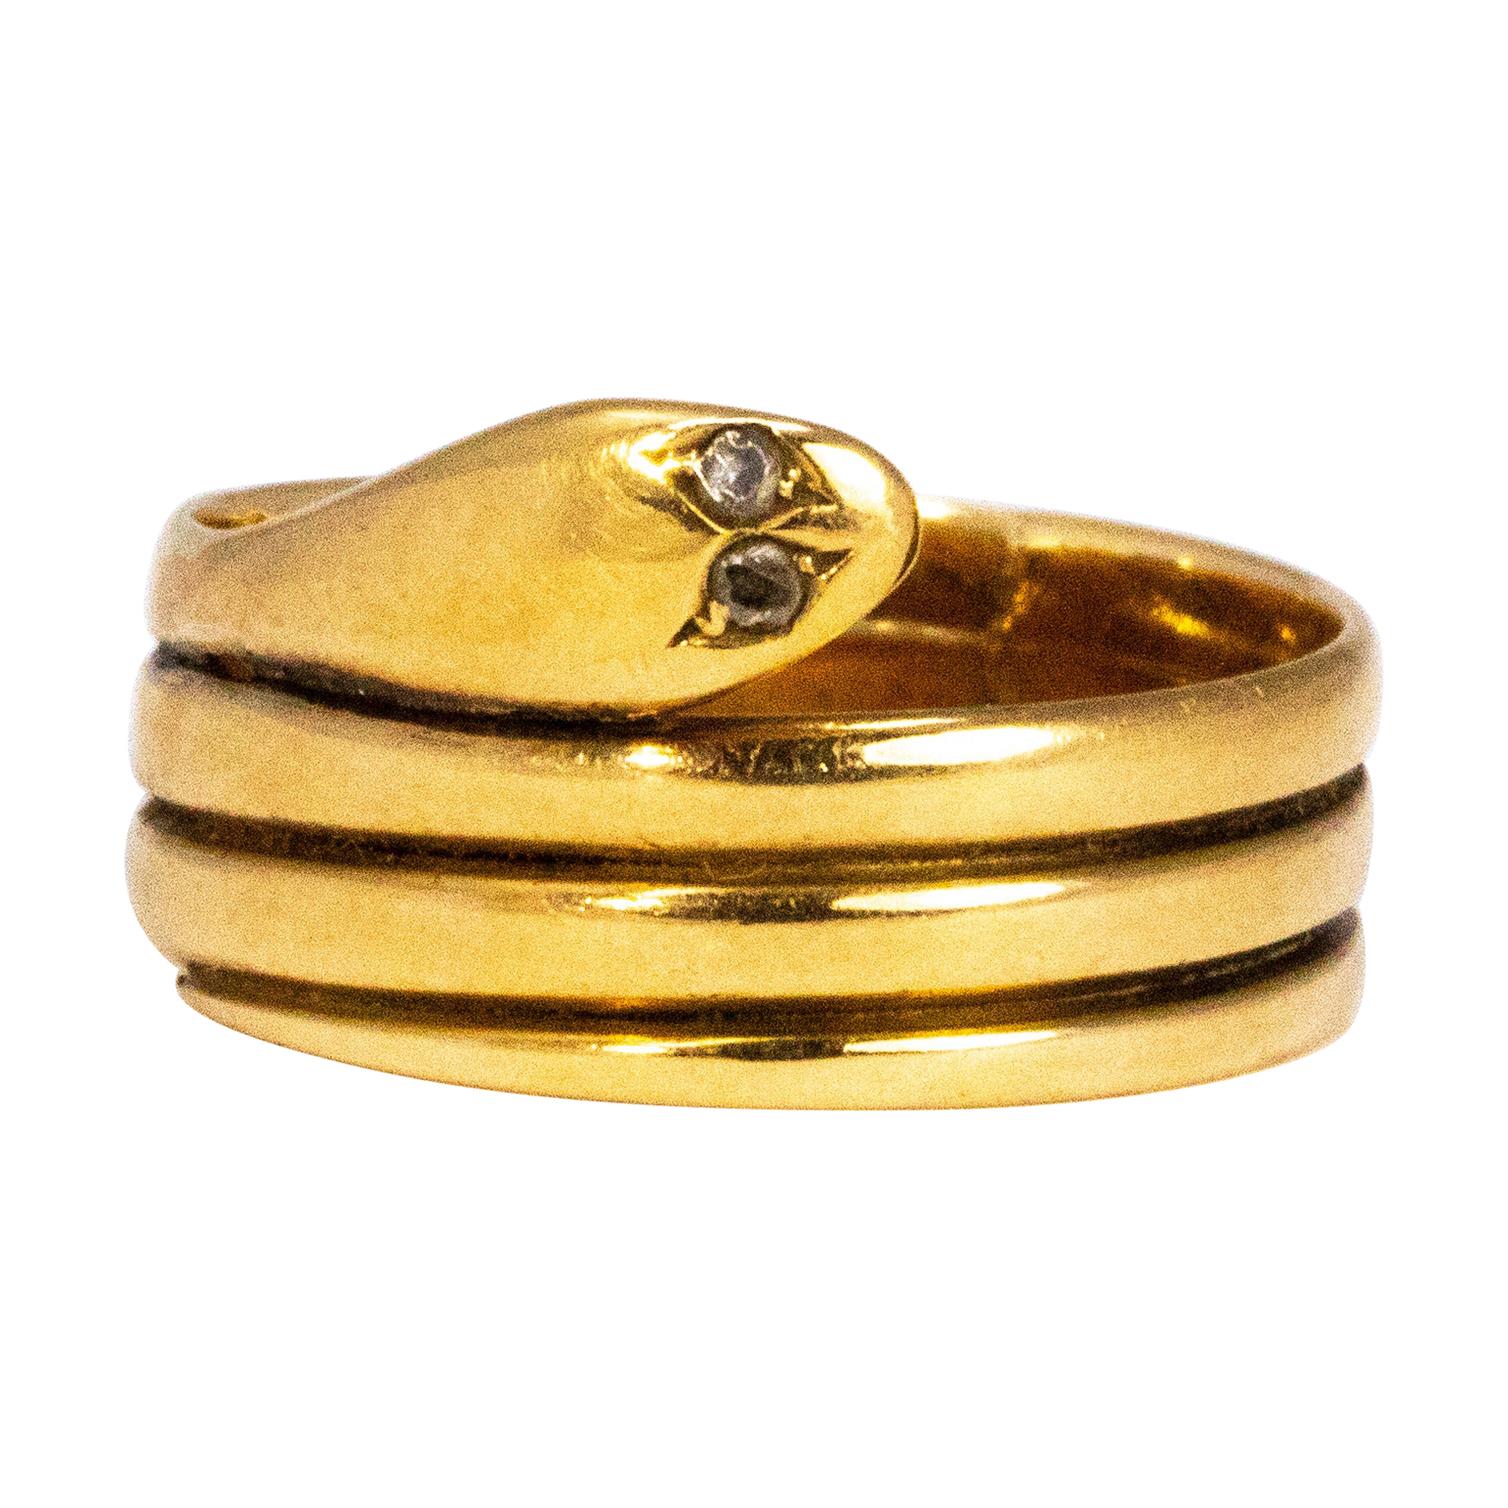 Victorian Diamond and 18 Carat Gold Snake Ring